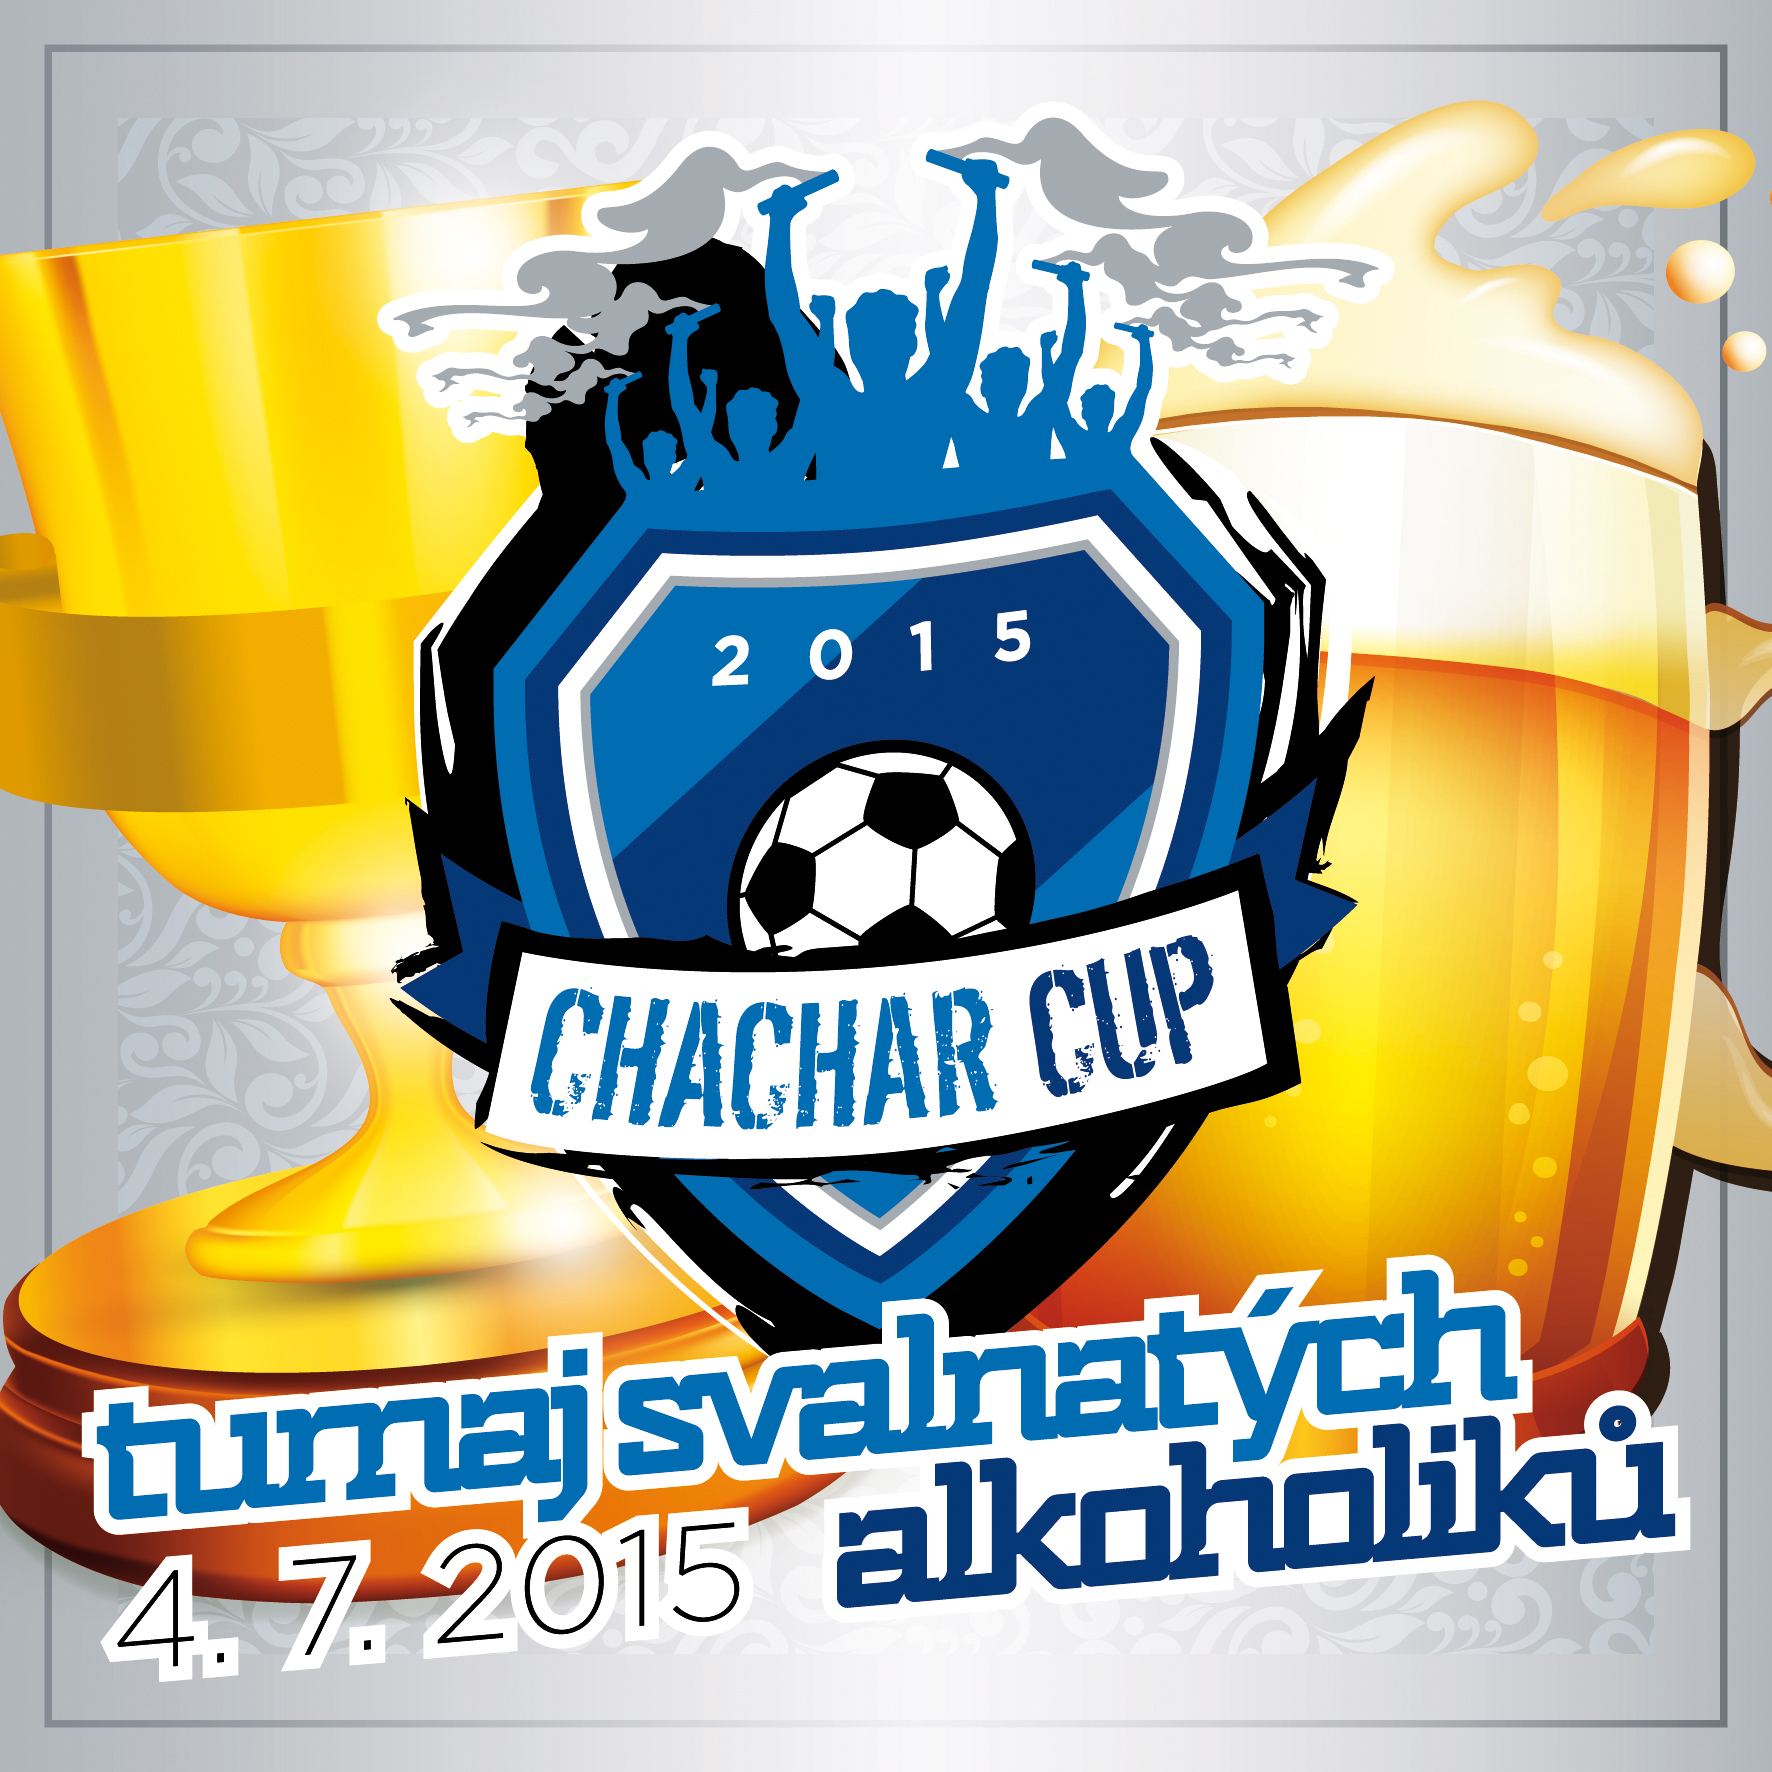 Chachar cup 2015